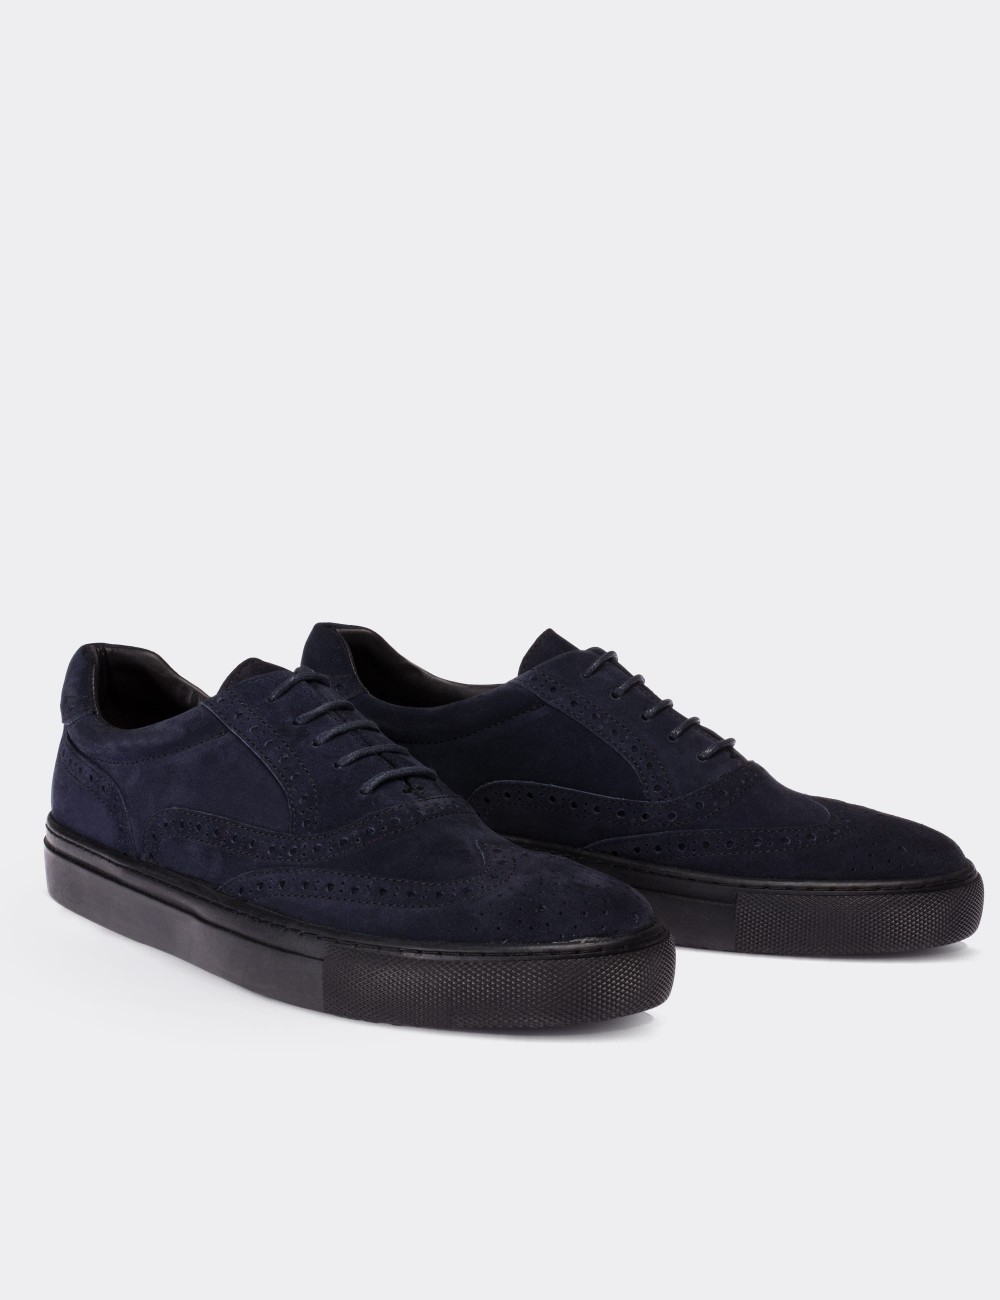 Navy Suede Leather  Sneakers - 01637MLCVC06